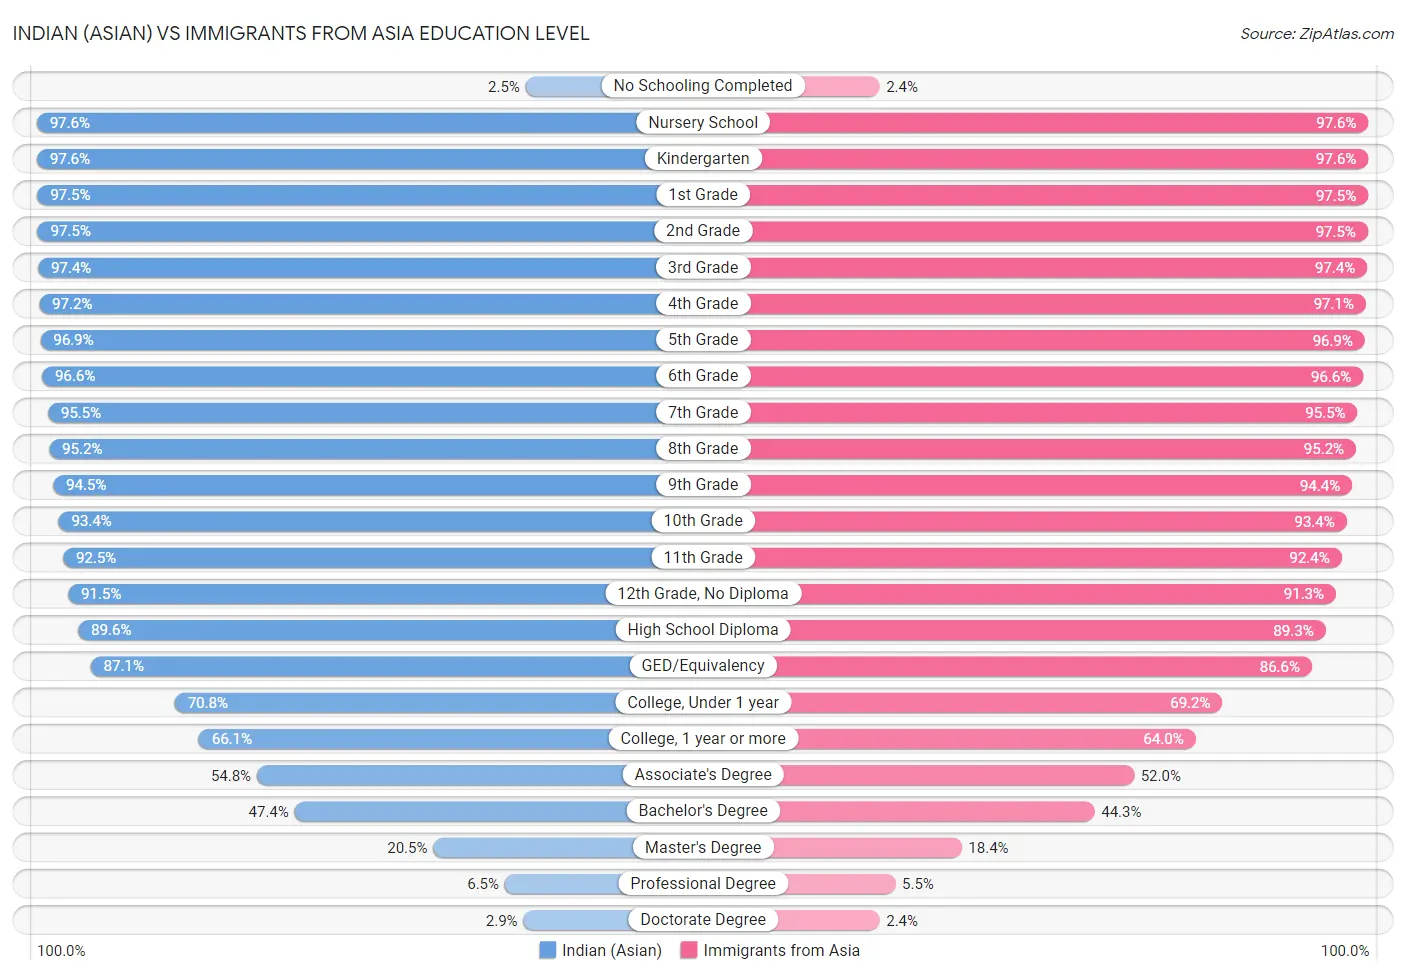 Indian (Asian) vs Immigrants from Asia Education Level